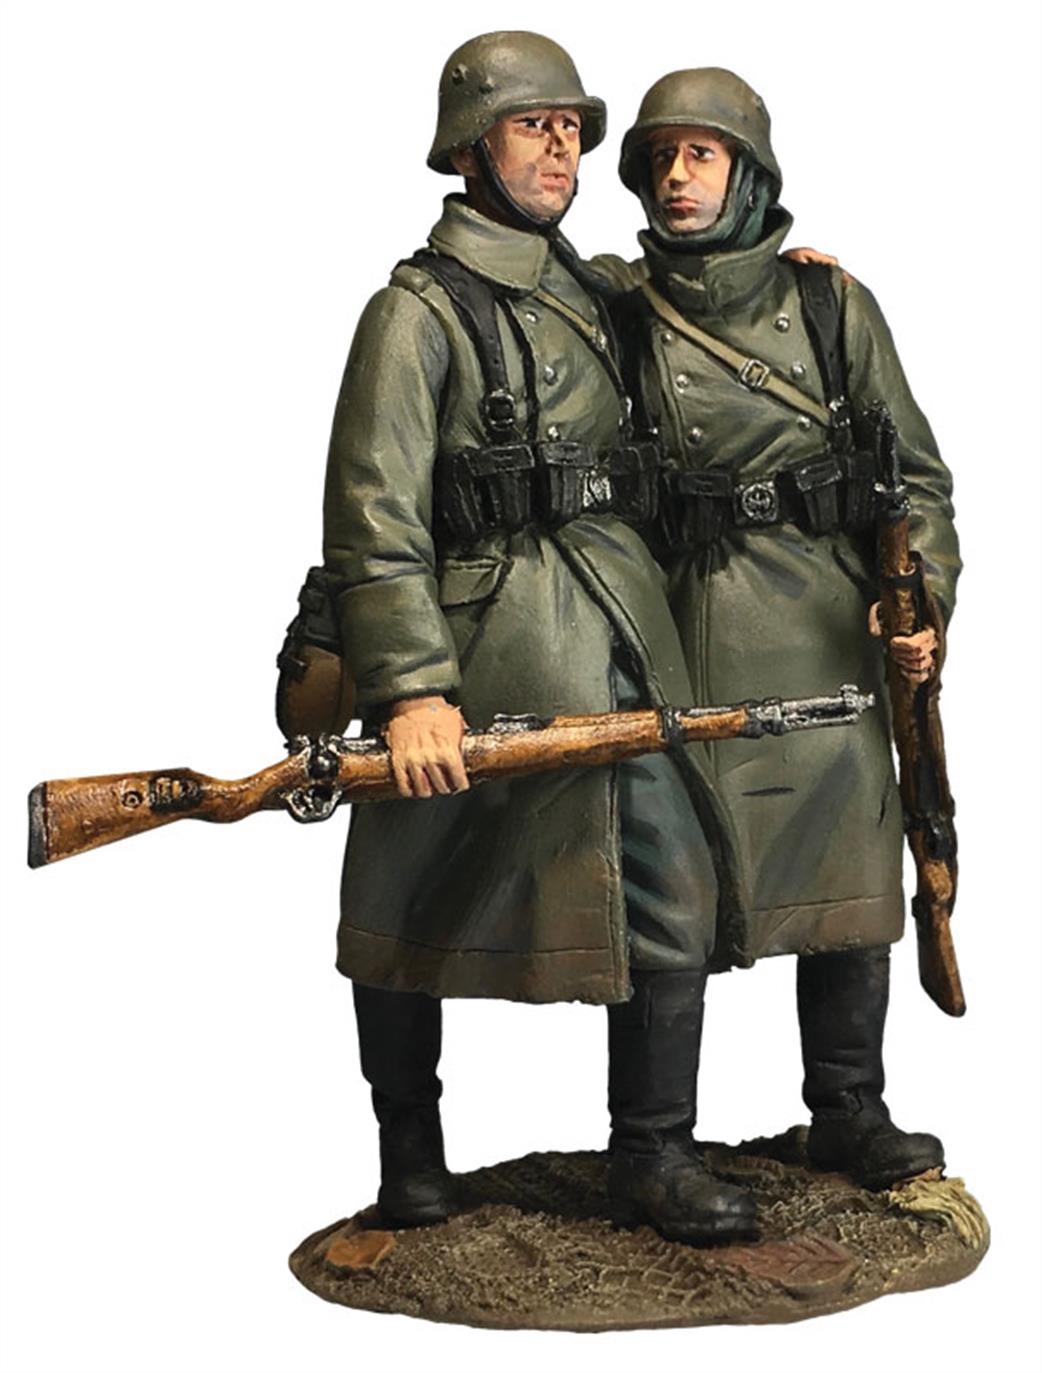 WBritain 1/30 25060 German Soldier Helping Wounded Comrade in Greatcoat 2 Piece Set